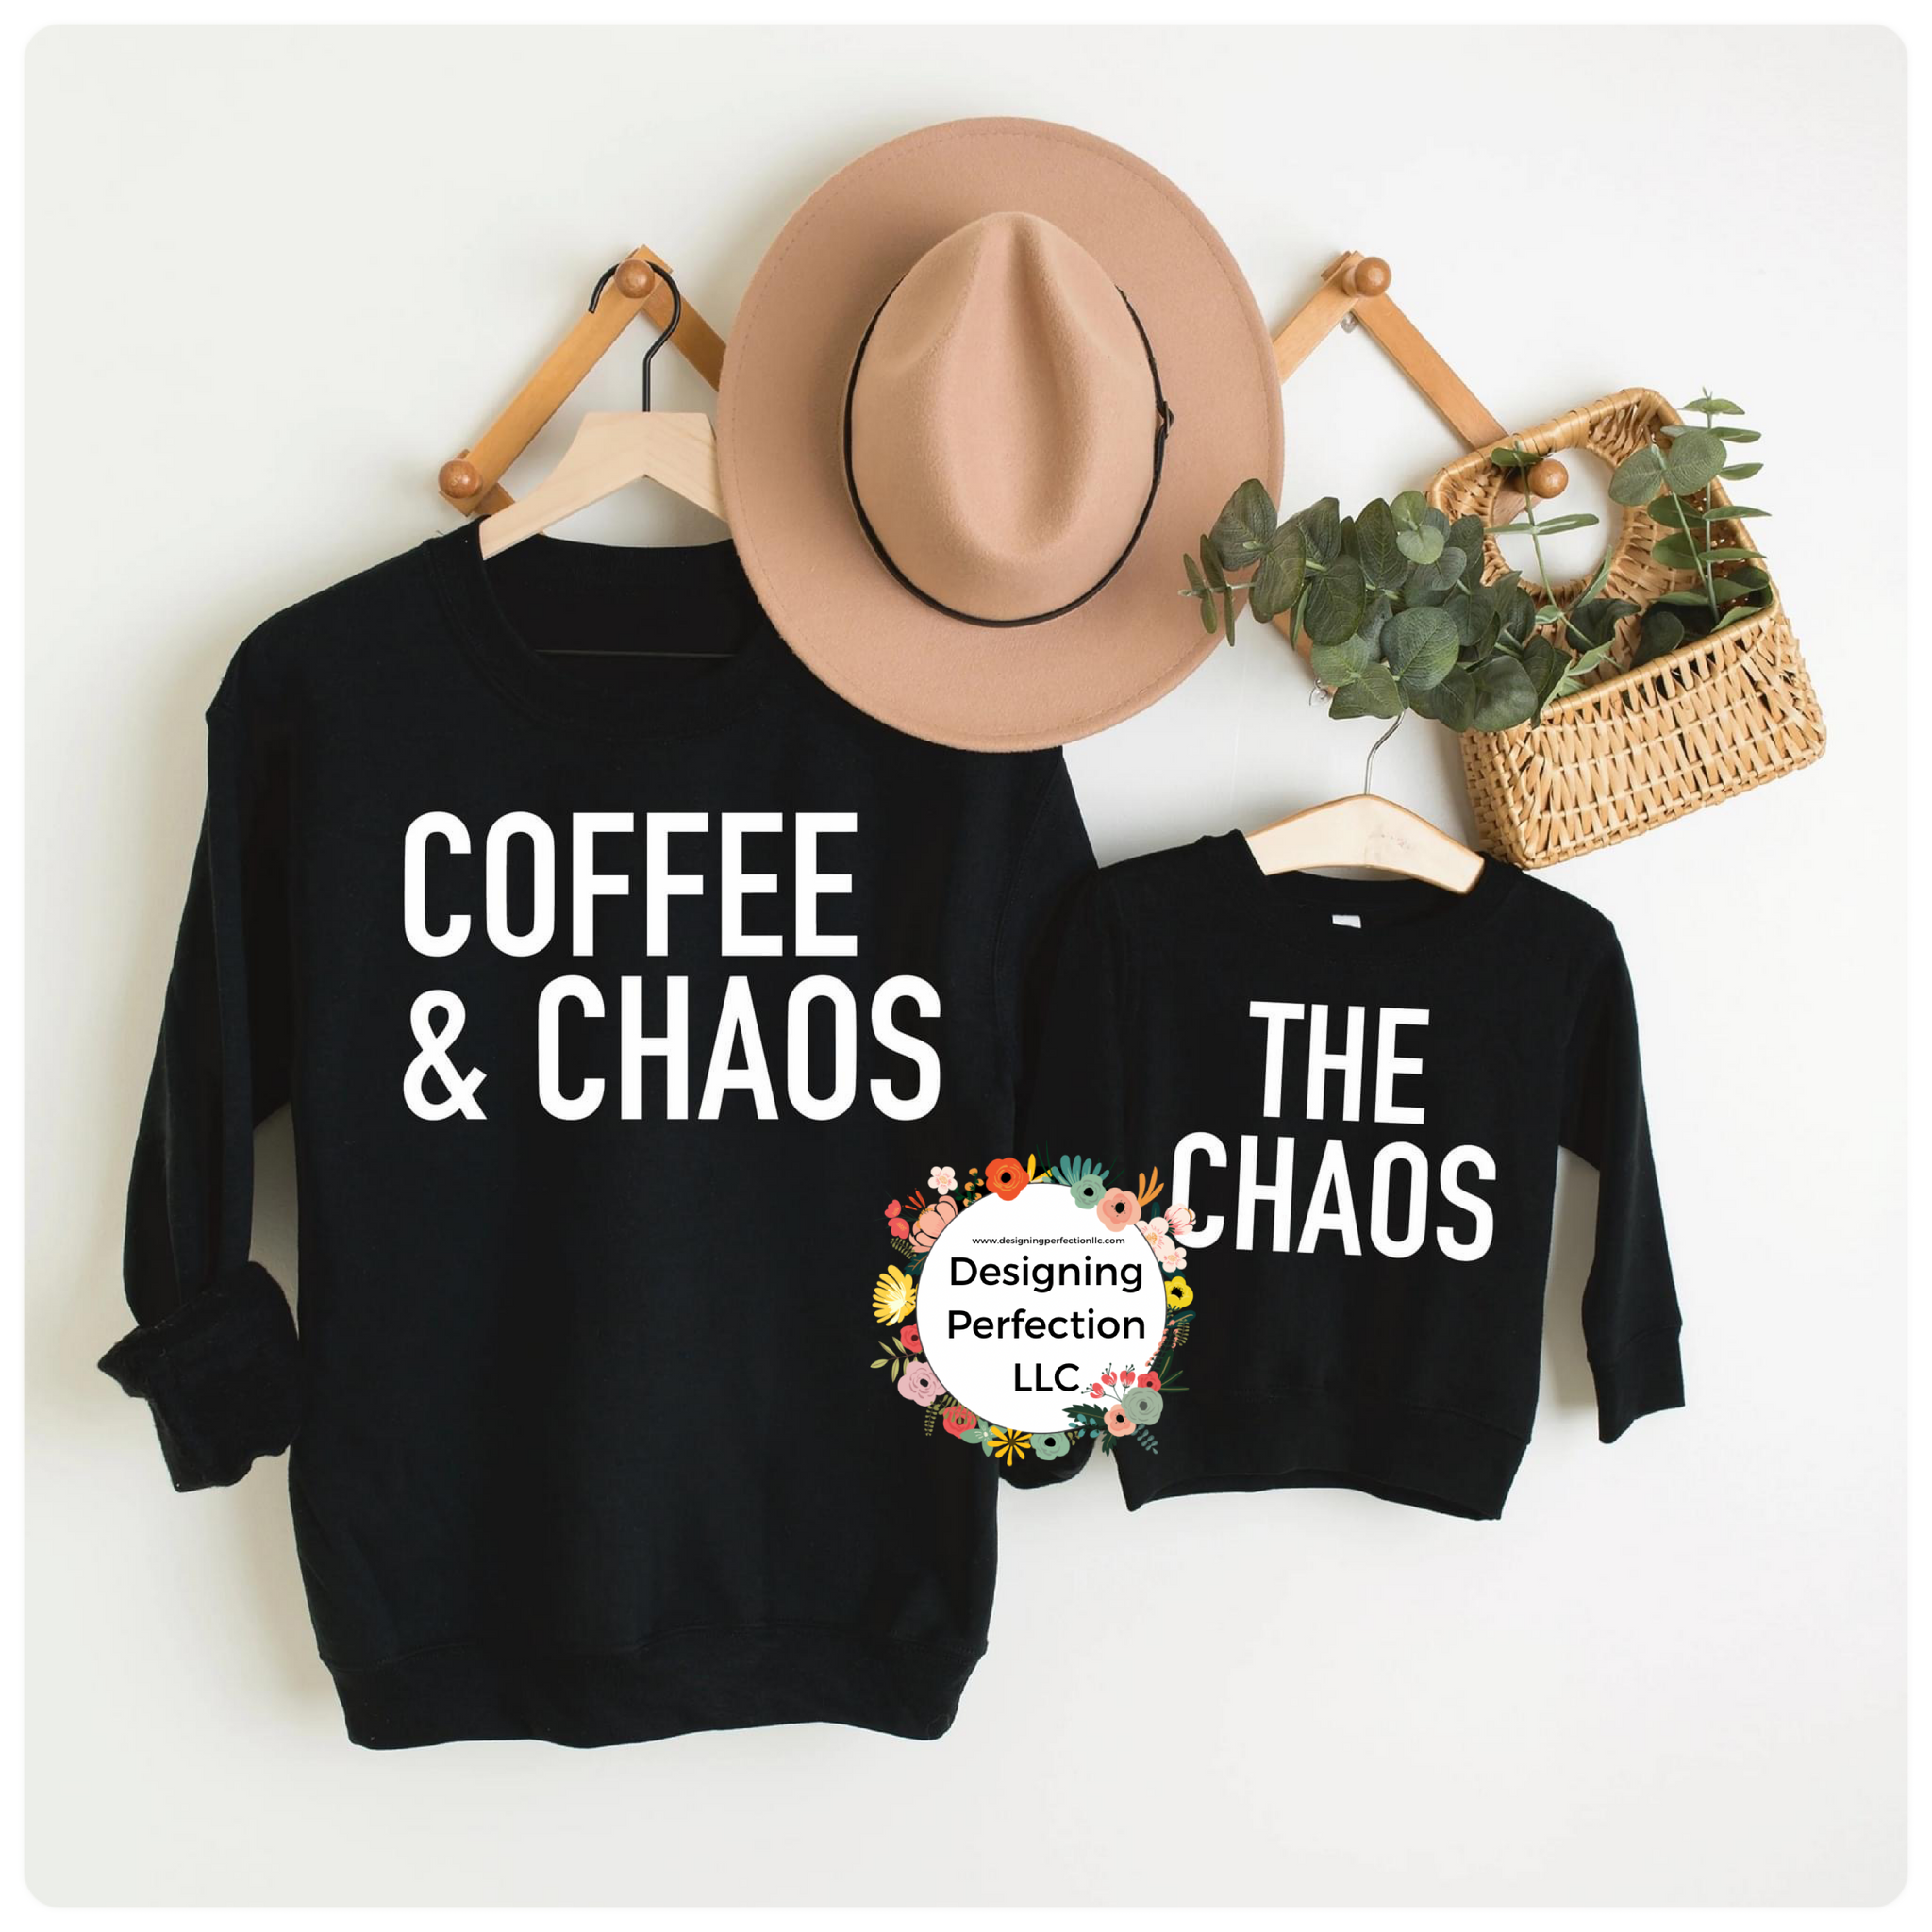 Coffee and chaos YOUTH - adult available search tittle (on tee)